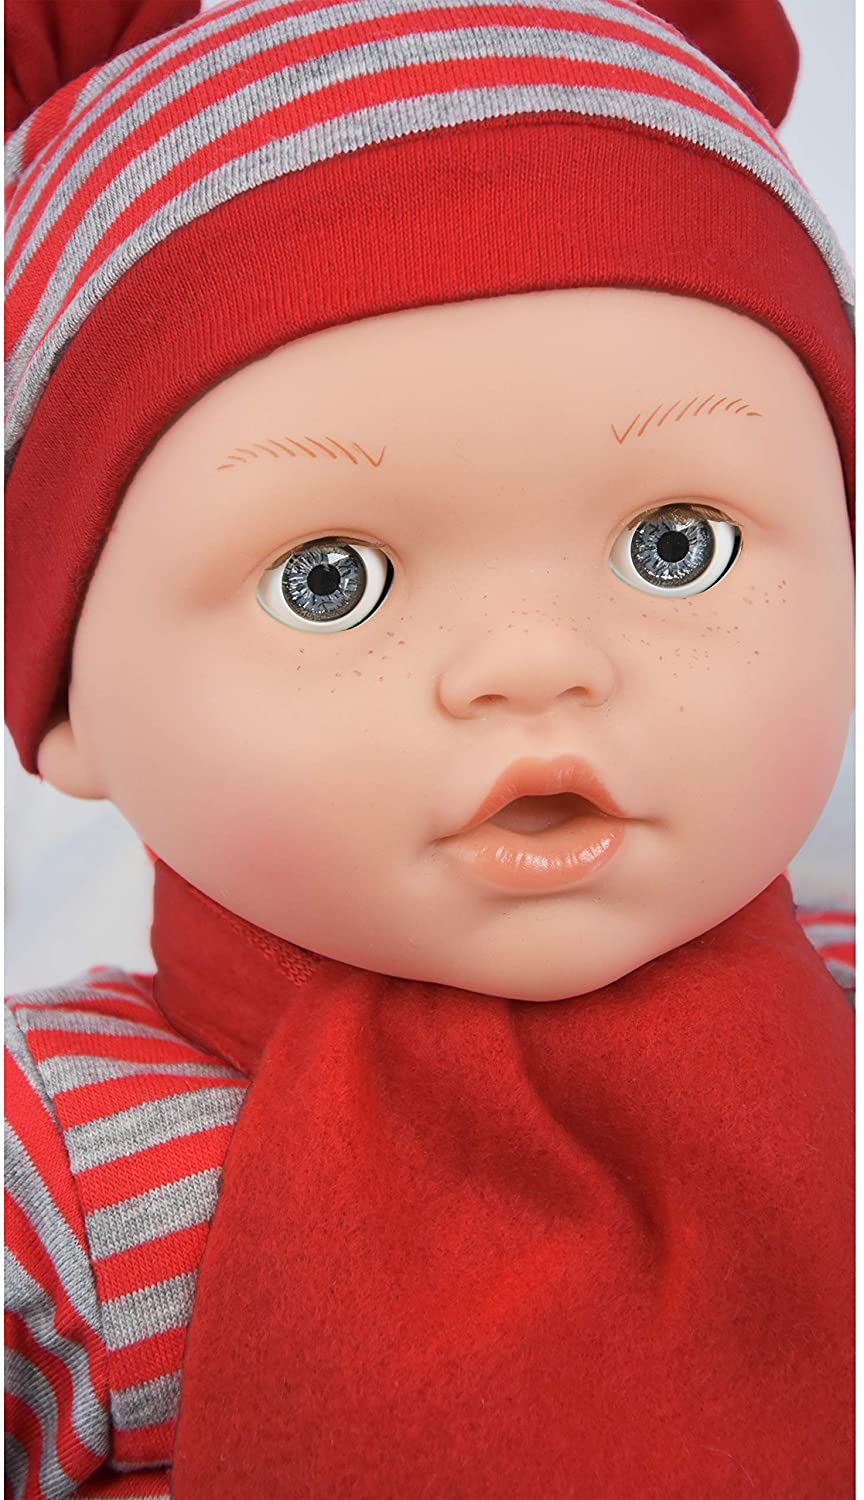 Sleeping Girl Dolls with Freckles, Sounds and Dummy BiBi Doll - The Magic Toy Shop